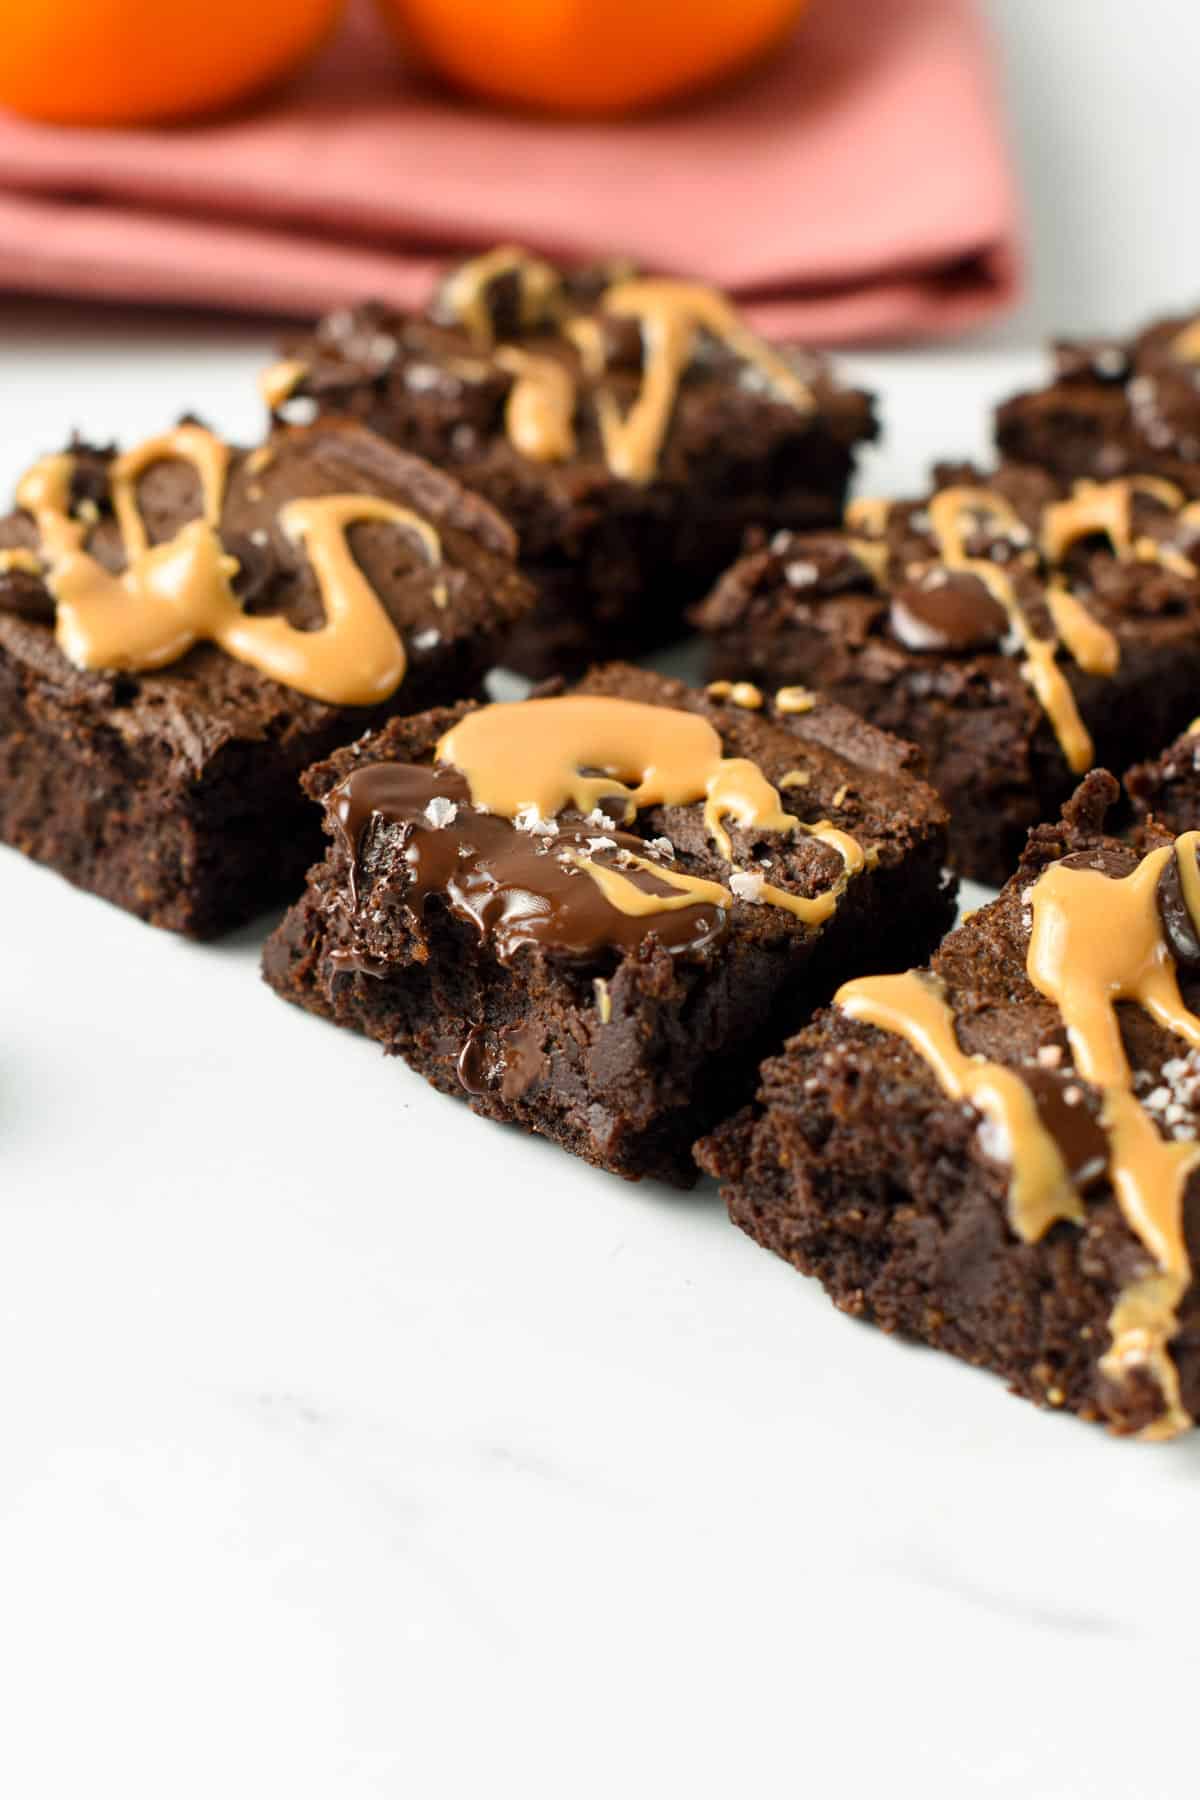 Vegan Pumpkin Brownies cut into small squares and decorated with peanut butter and melted chocolate.